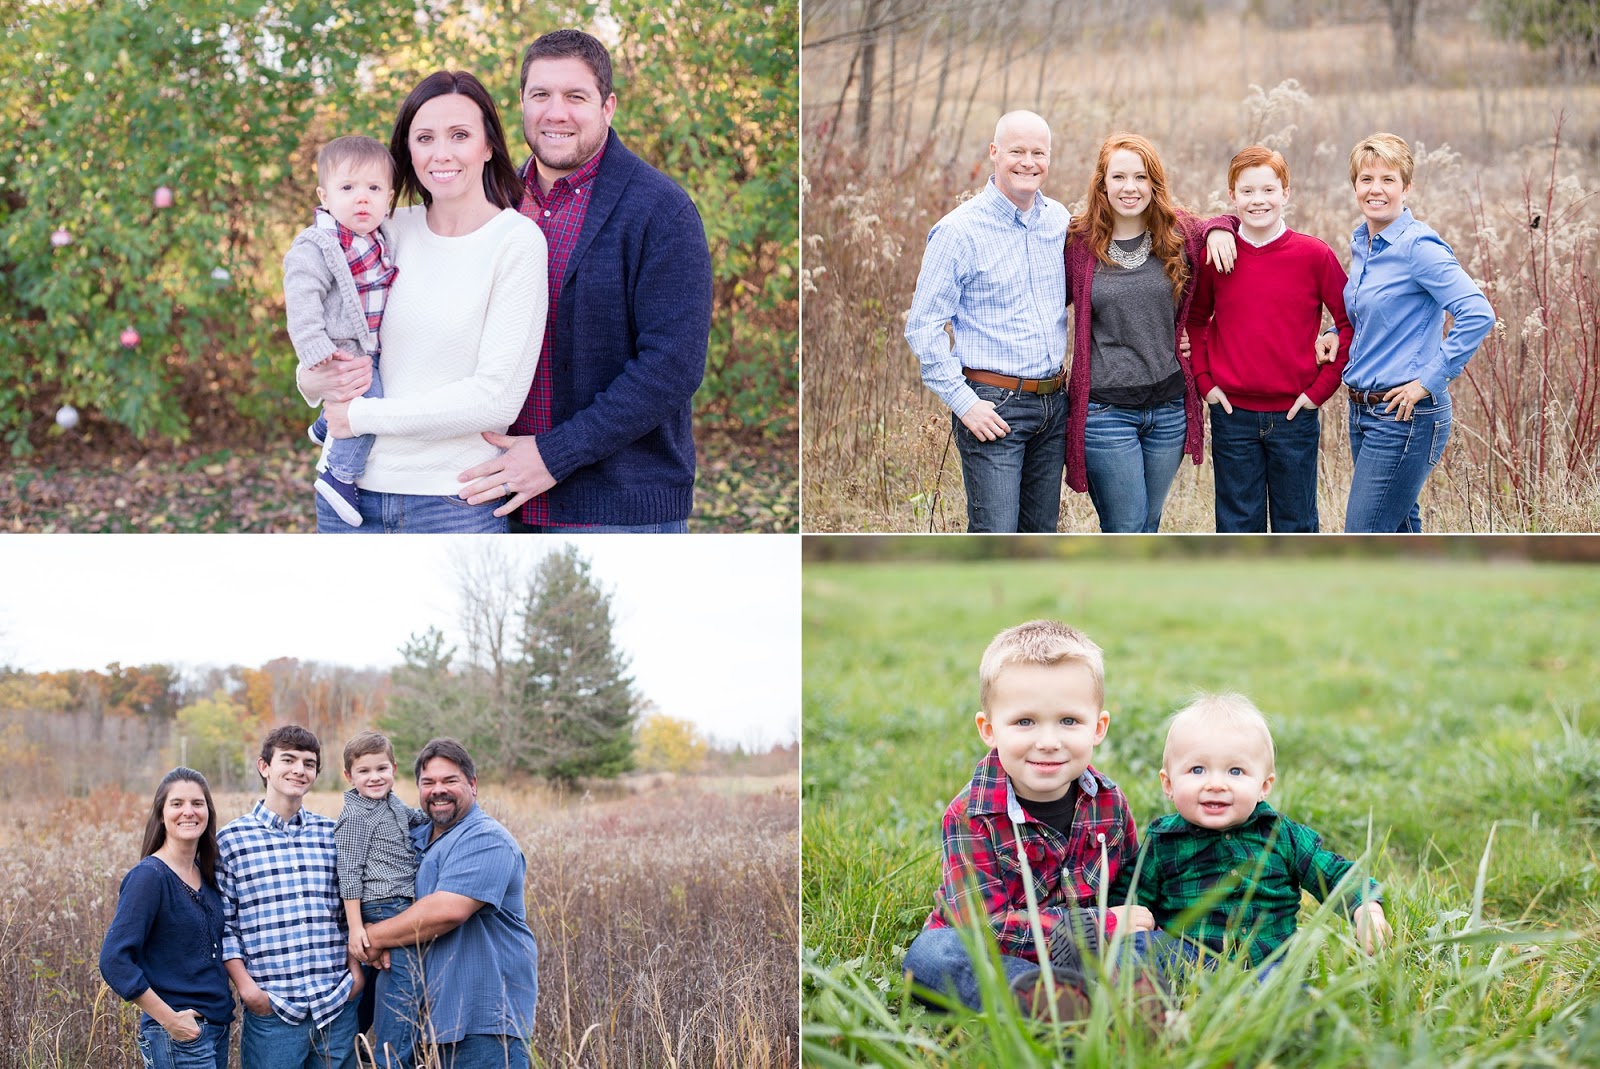 How to Decide Between Full vs. Mini Sessions for Your Family Photos